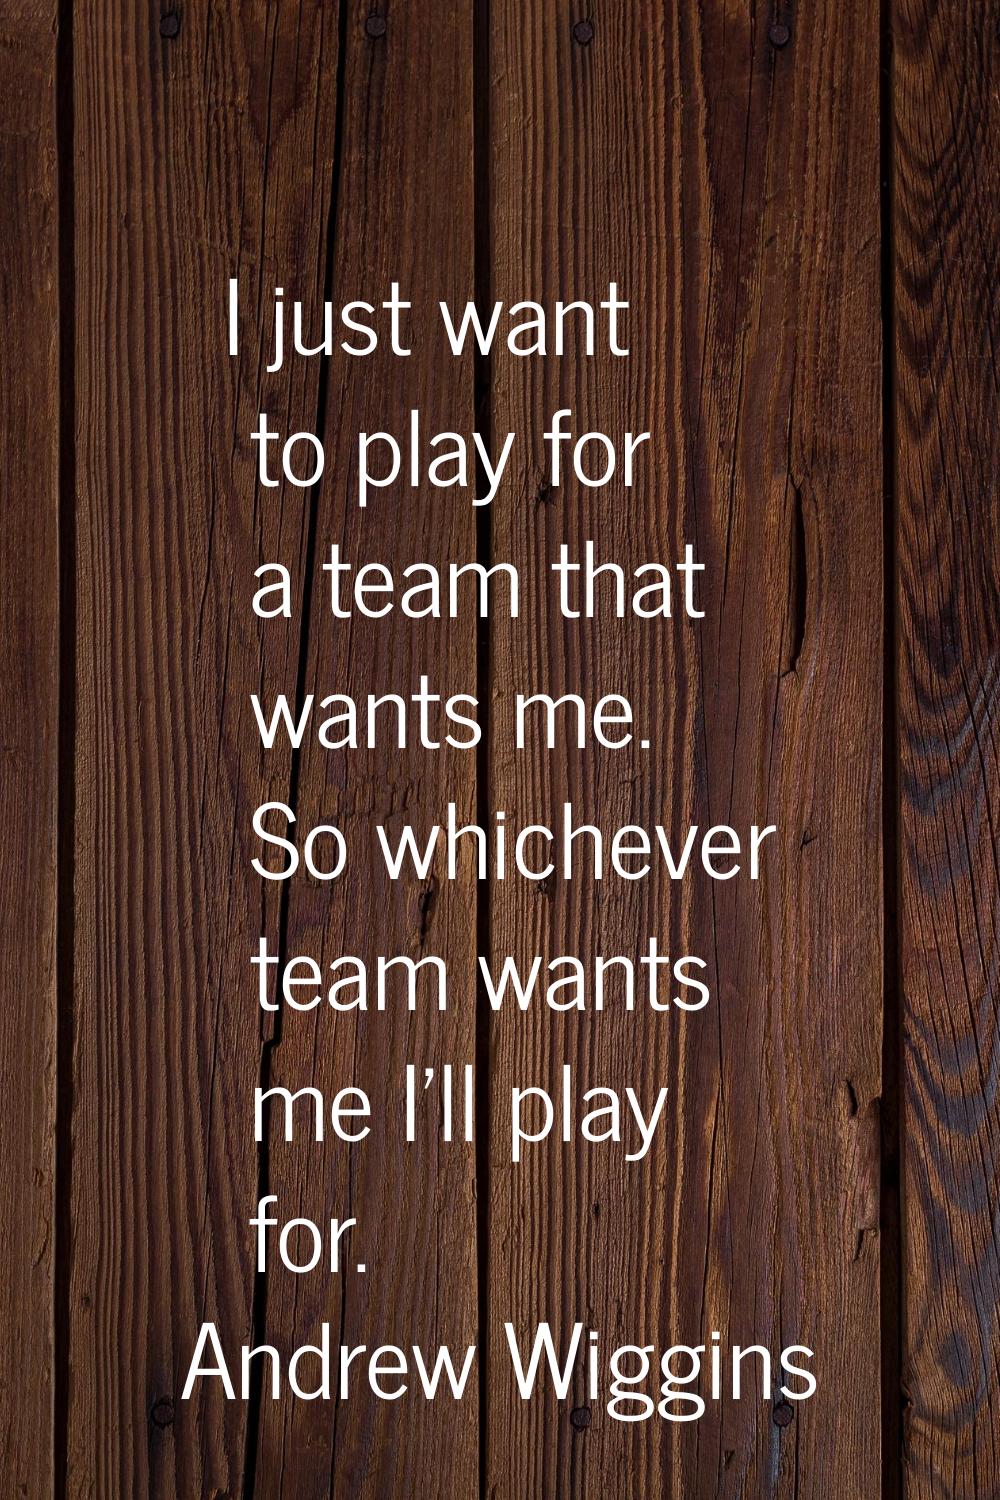 I just want to play for a team that wants me. So whichever team wants me I'll play for.